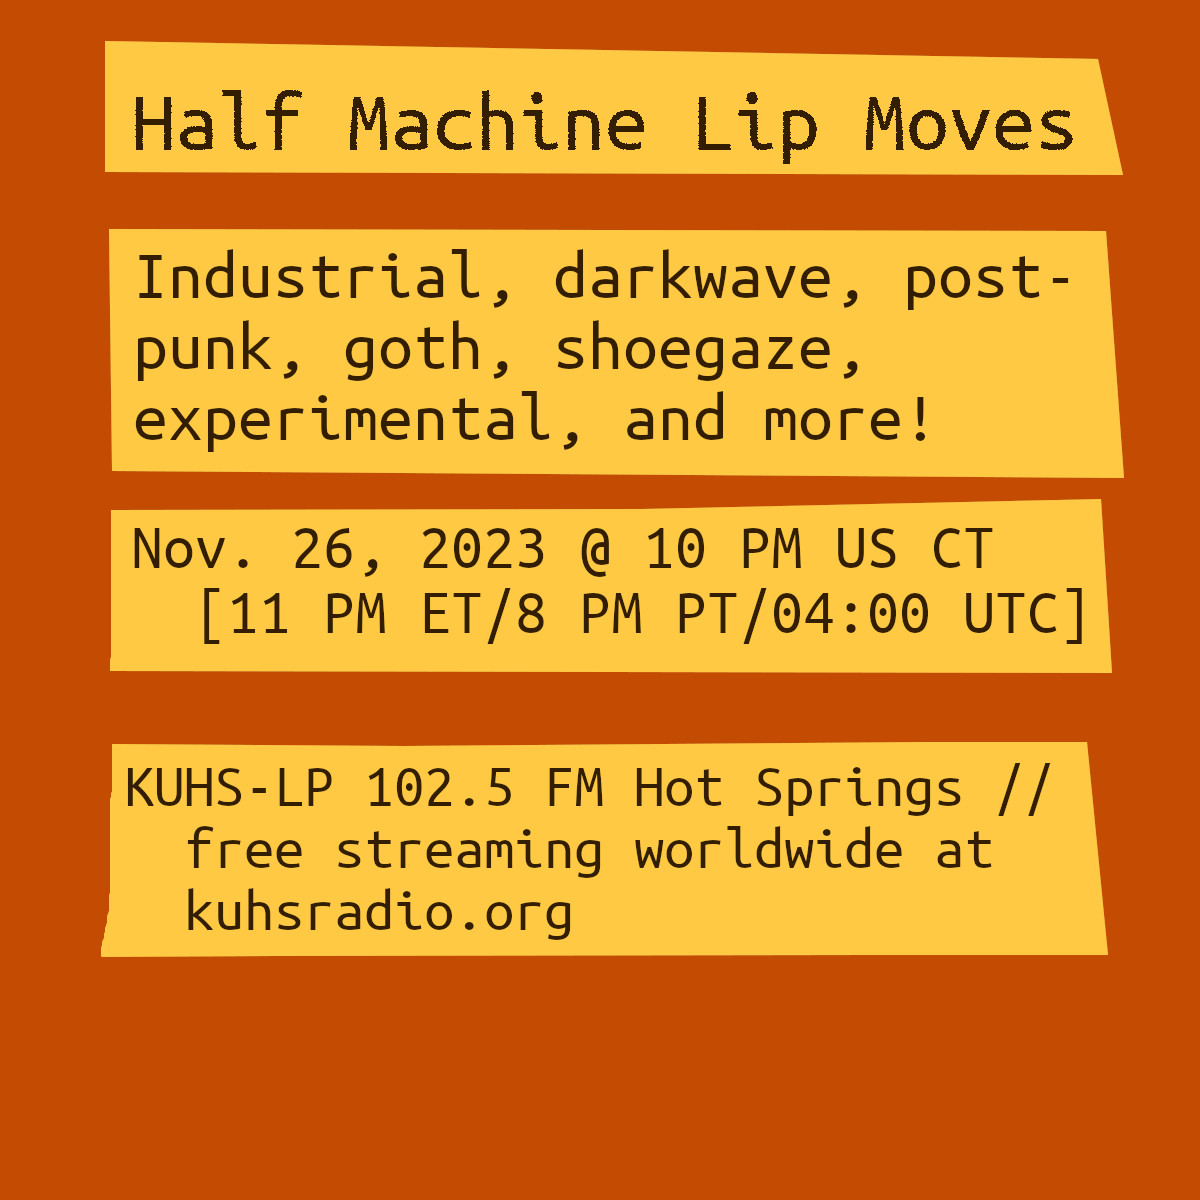 The image is reddish-orange box. There are four yellow boxes with text on them. The text reads, &ldquo;Half Machine Lip Moves. Industrial, darkwave, goth, shoegaze, experimental, and more! November 26, 2023 at 10 PM Central Time (11 PM Eastern/8 PM Pacific/05:00 UTC) on KUHS-LP 102.5 FM, free worldwide streaming at kuhsradio.org.